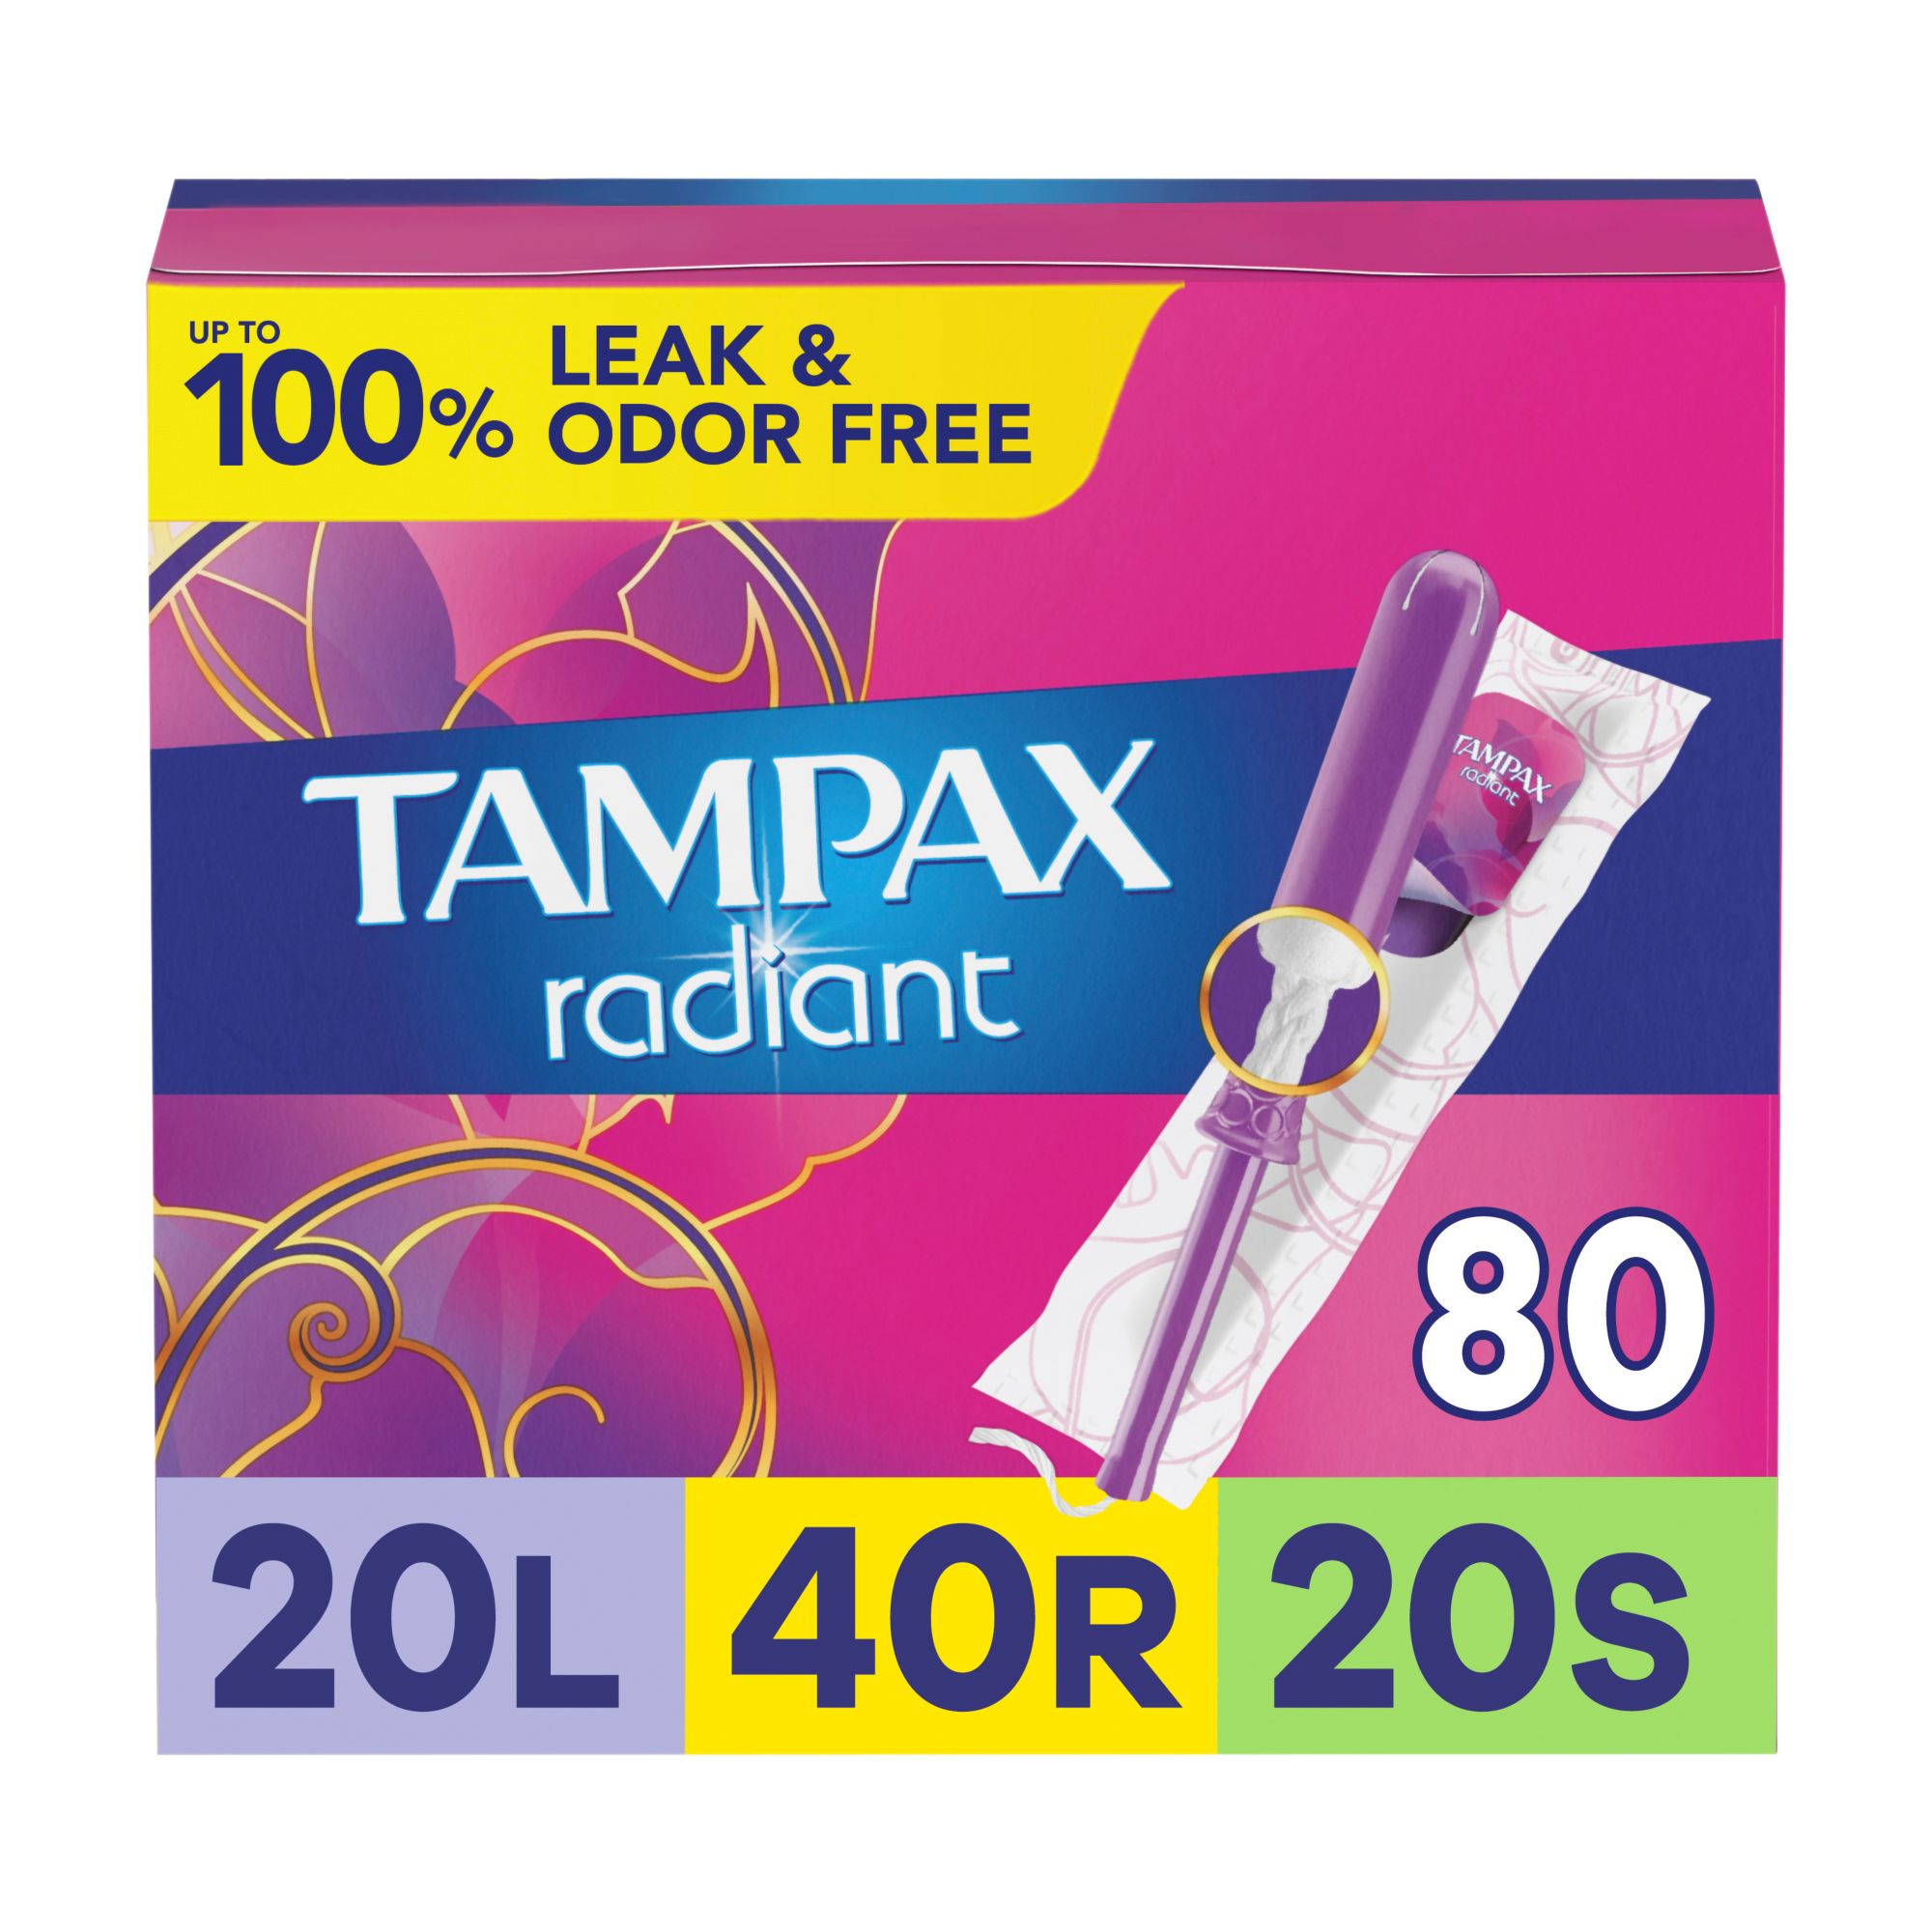 Tampax Radiant Tampons Trio Pack with LeakGuard Braid, Lite/Regular/Super Absorbency, 80 ct. - Unscented